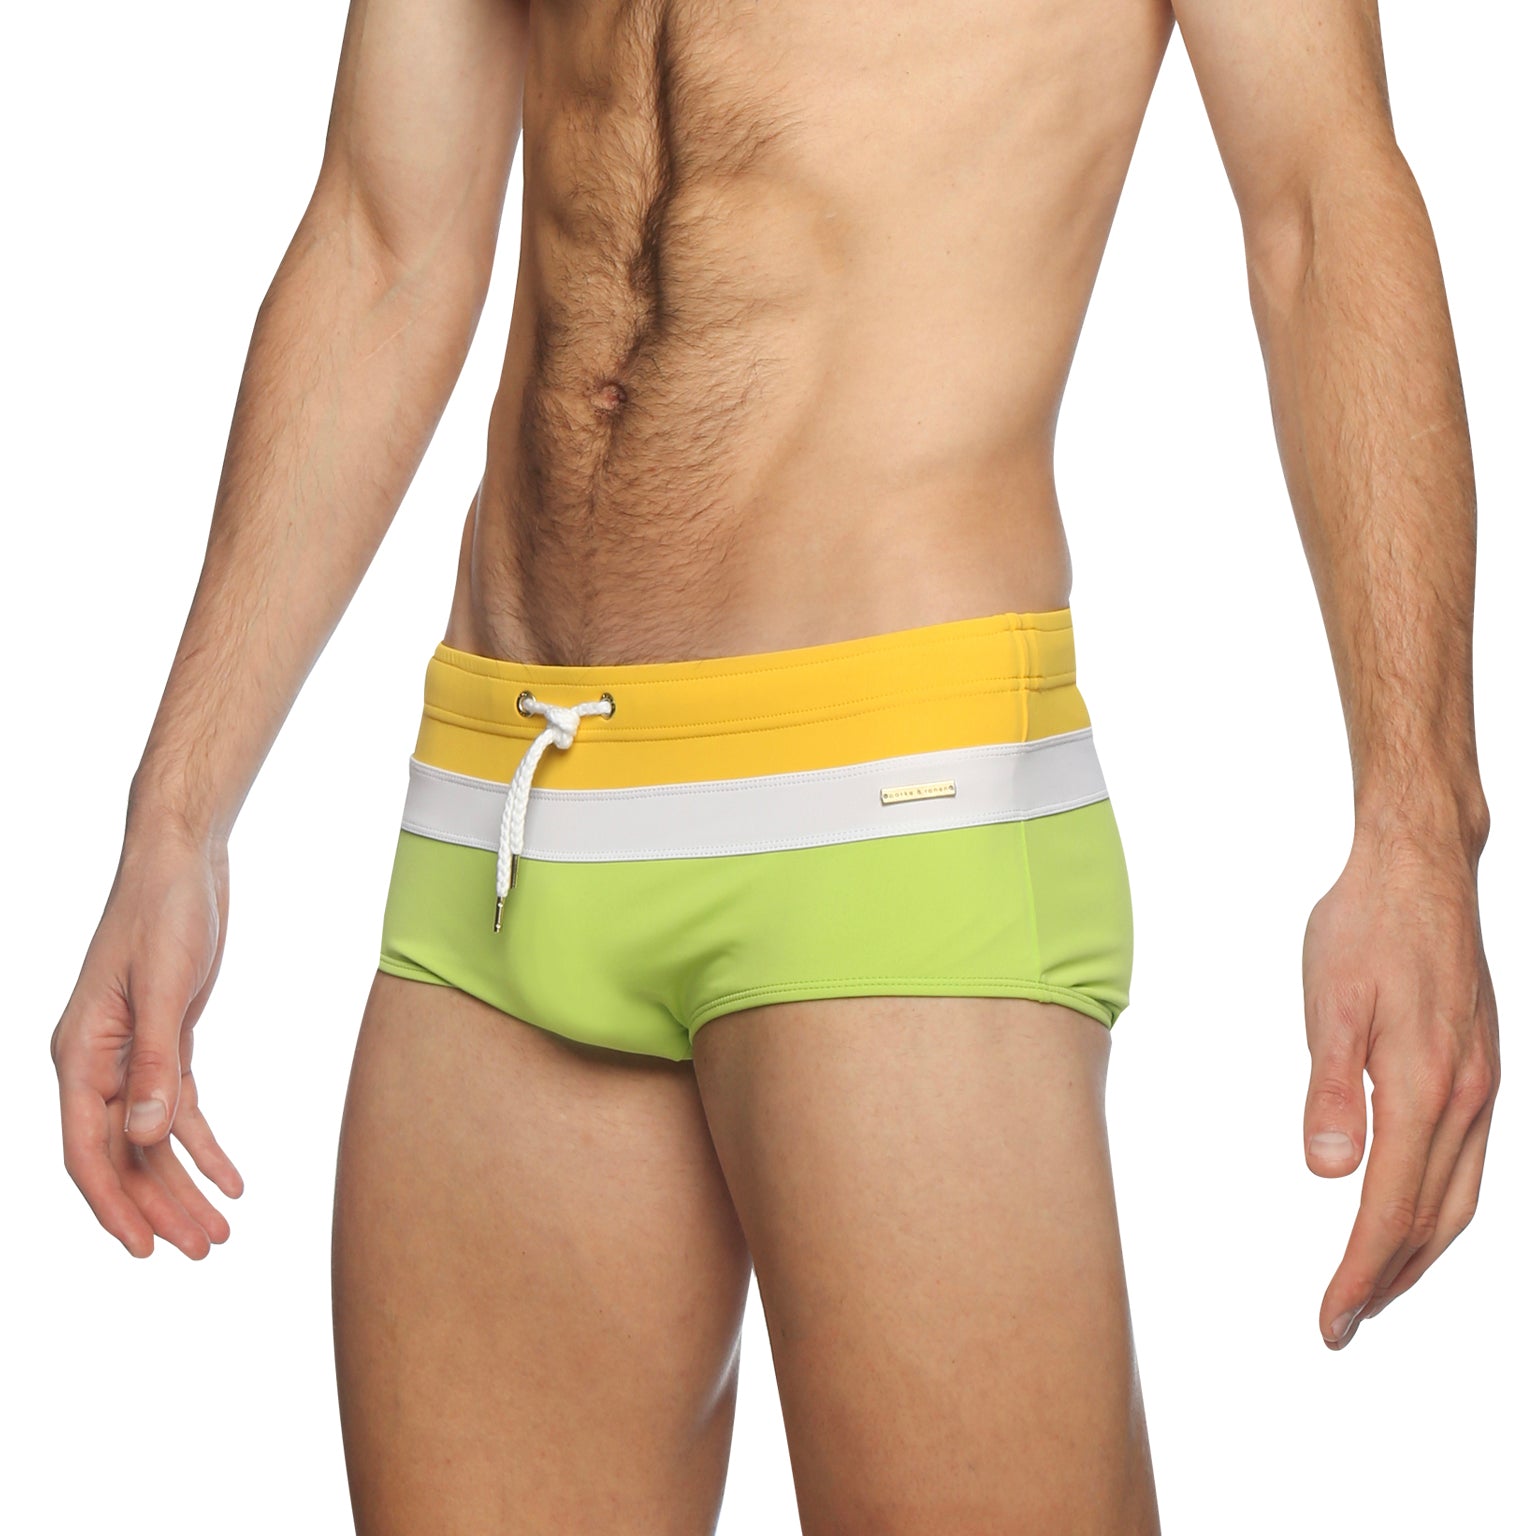 Sunflower/Lime Colorblock Corcovado Brief